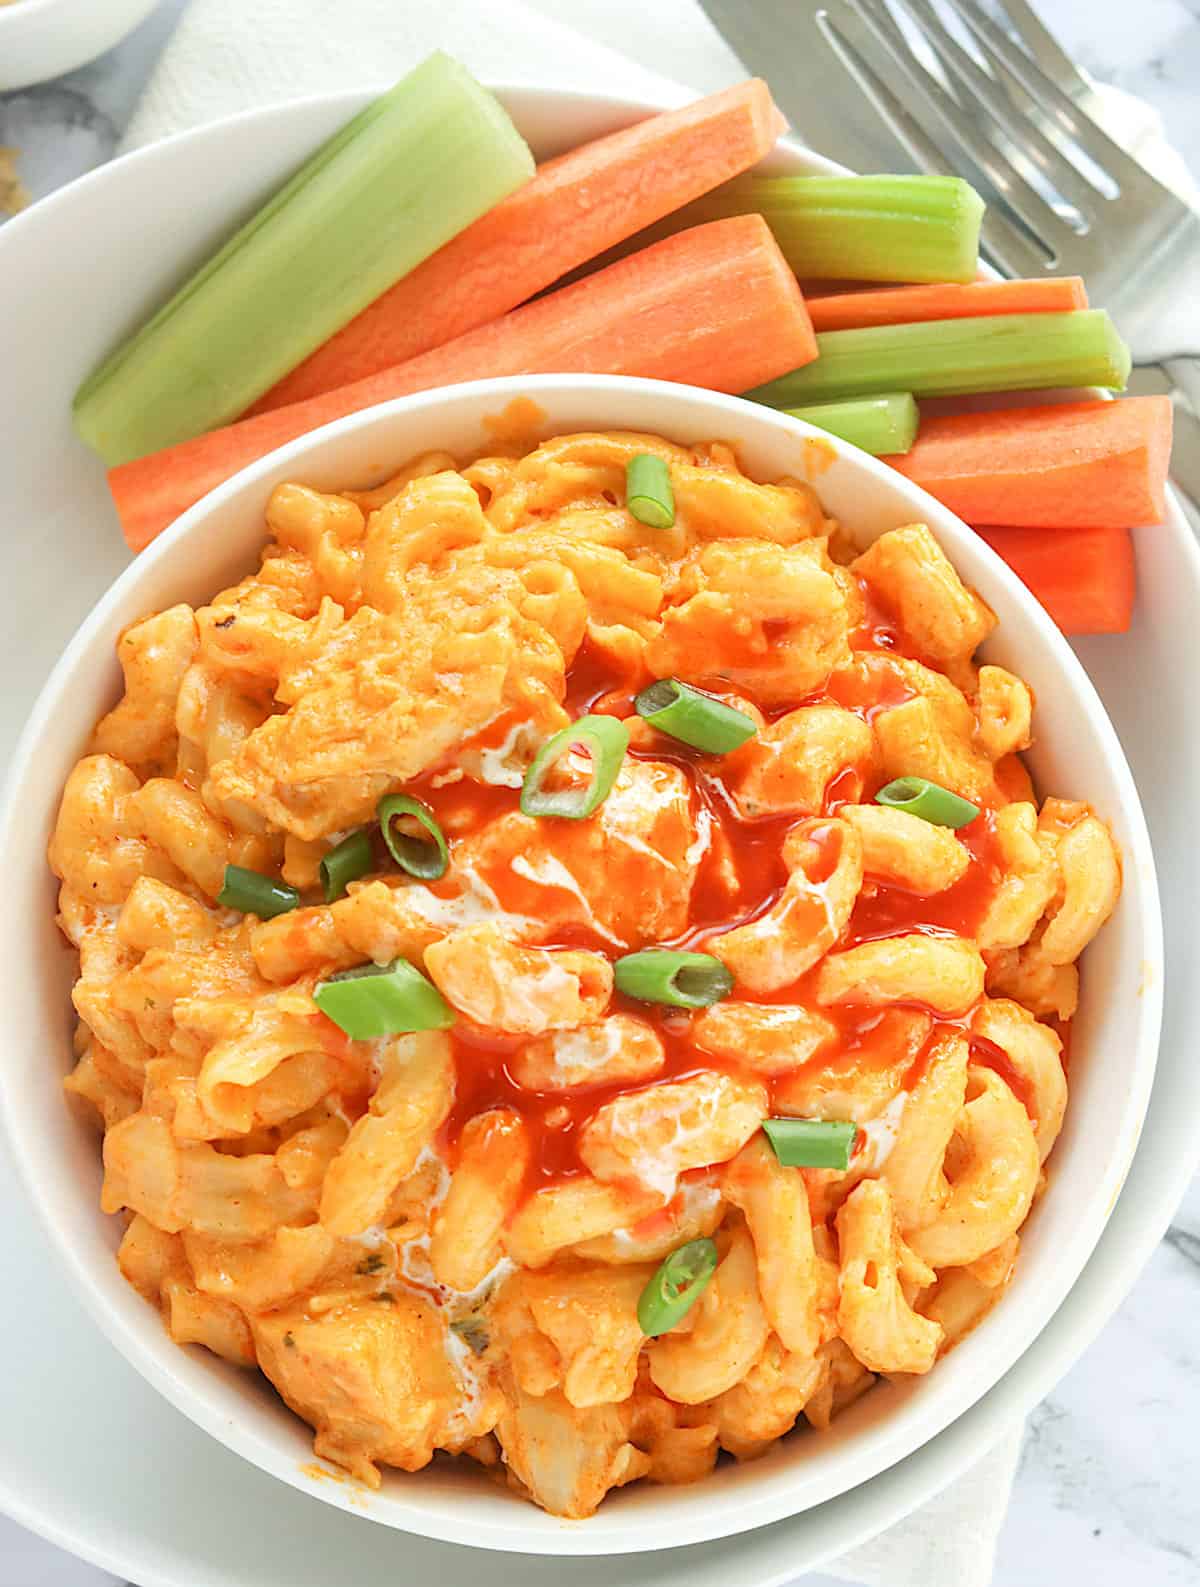 A tempting bowl of Buffalo Chicken Mac and Cheese drizzled with blue cheese dressing and hot sauce with celery and carrot sticks on the side